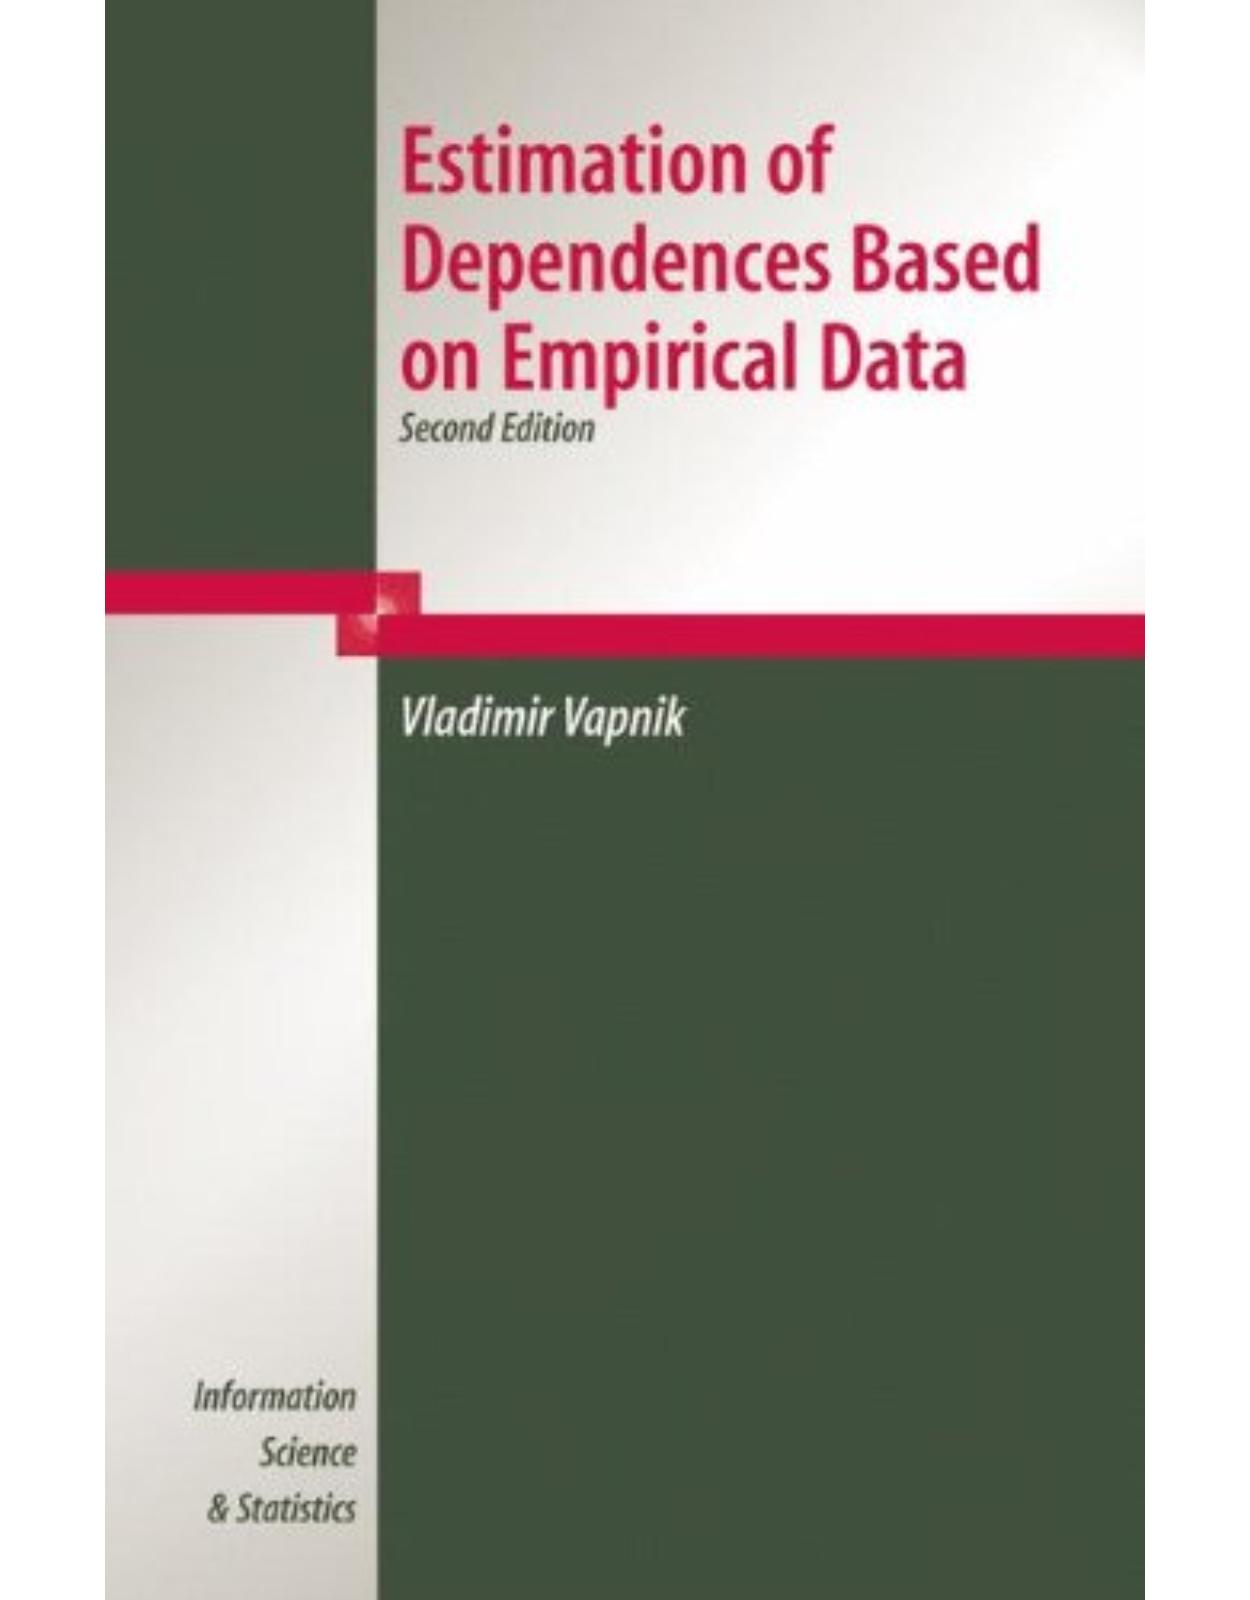 Estimation of Dependences Based on Empirical Data: Empirical Inference Science (Information Science and Statistics)